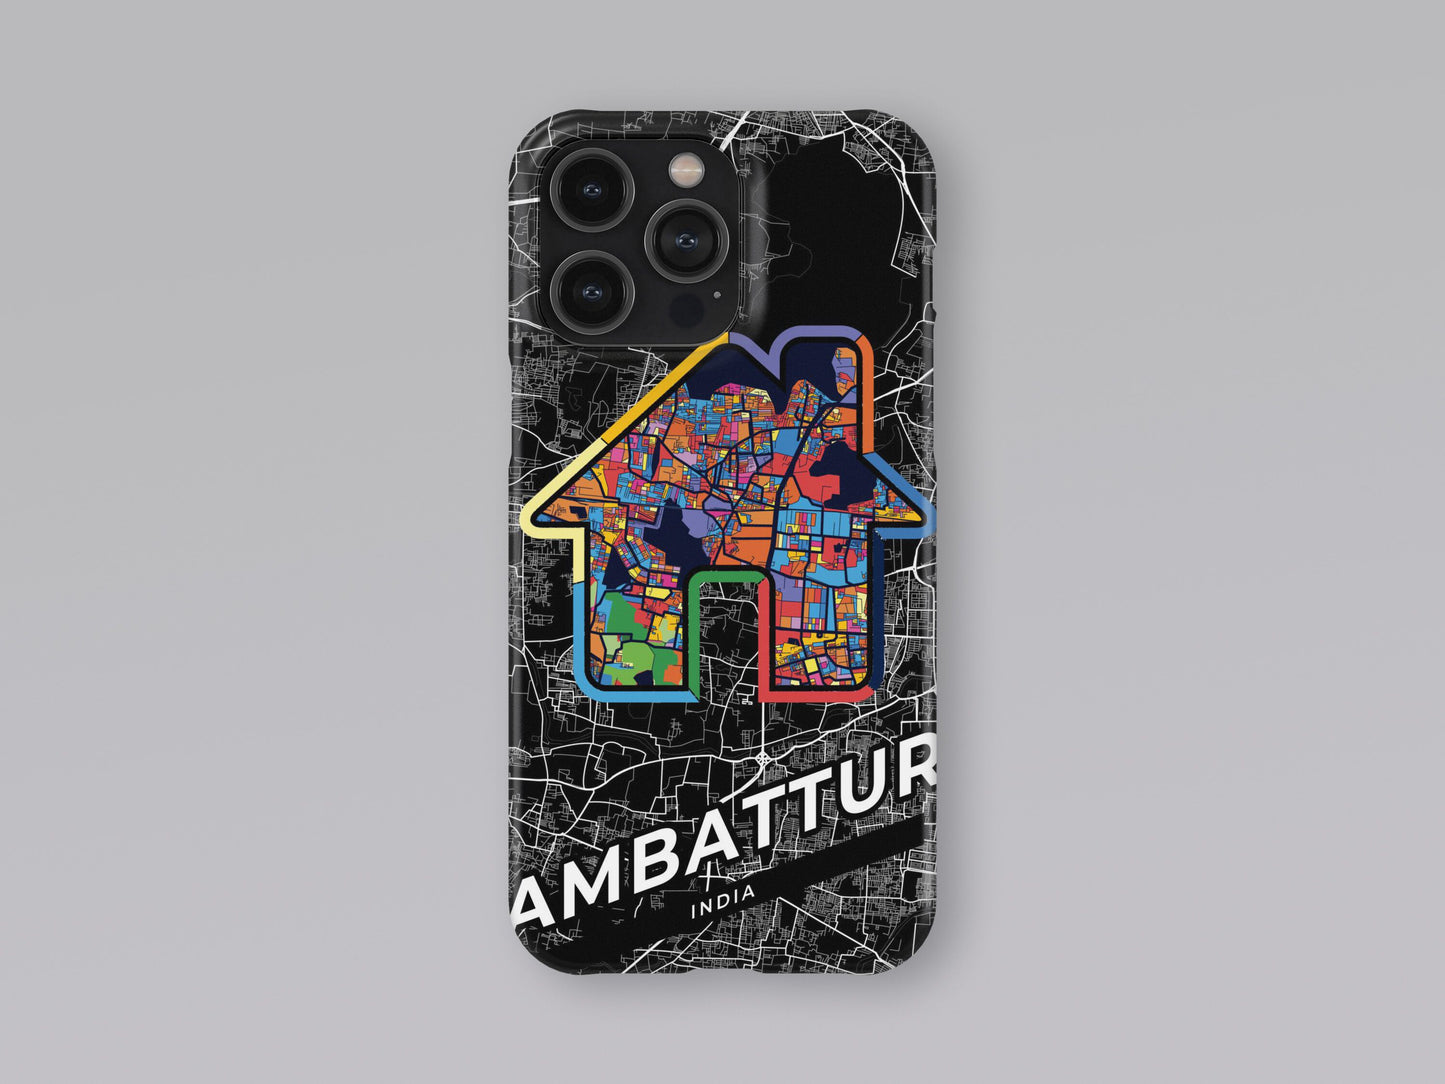 Ambattur India slim phone case with colorful icon. Birthday, wedding or housewarming gift. Couple match cases. 3